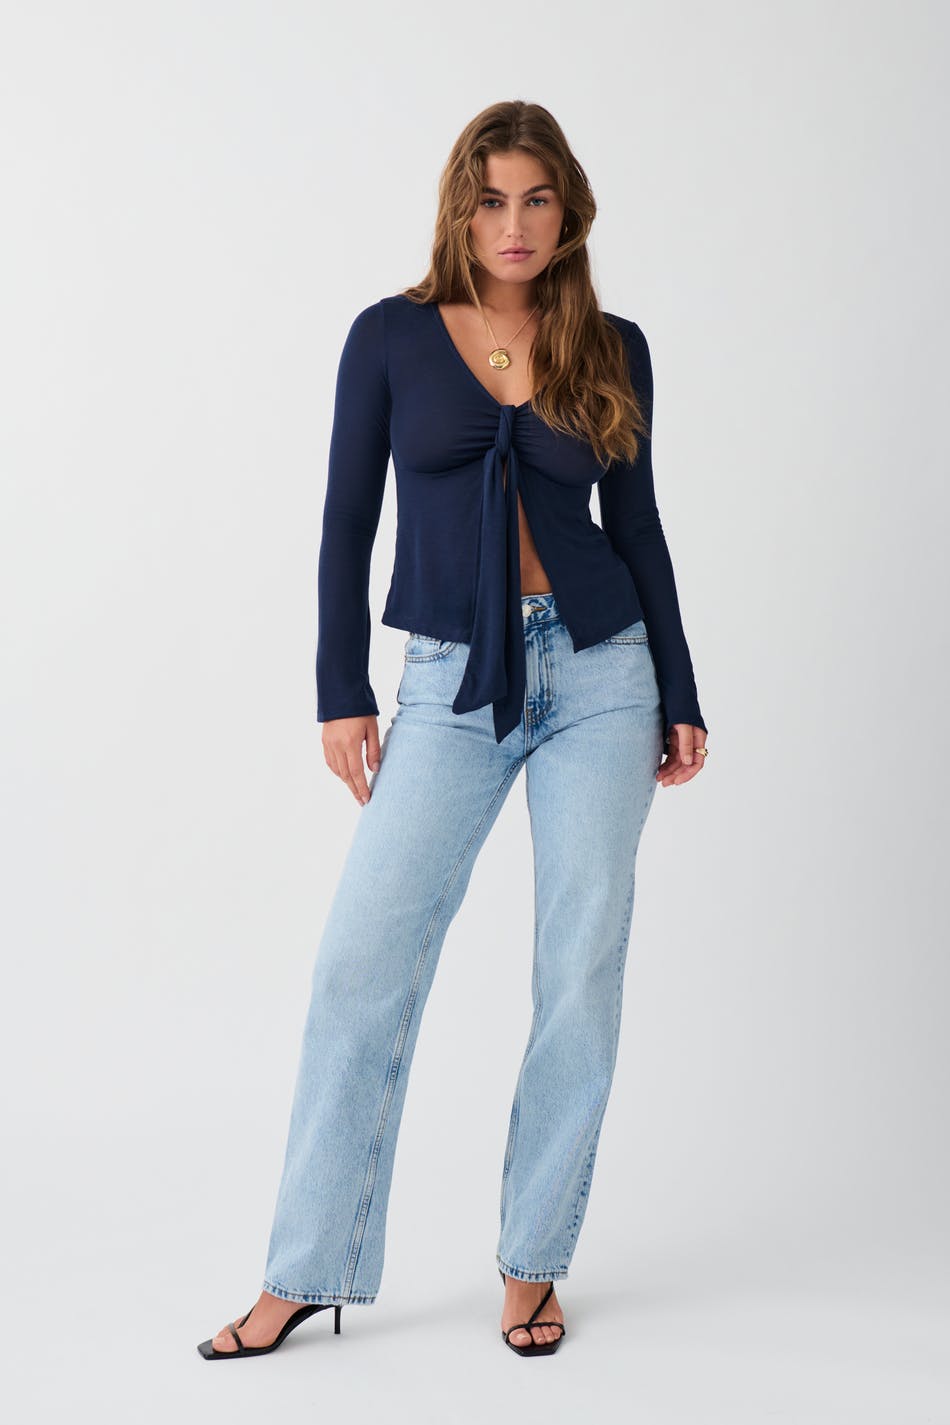  Gina Tricot- Low straight jeans - low waist jeans- Blue - 44- Female